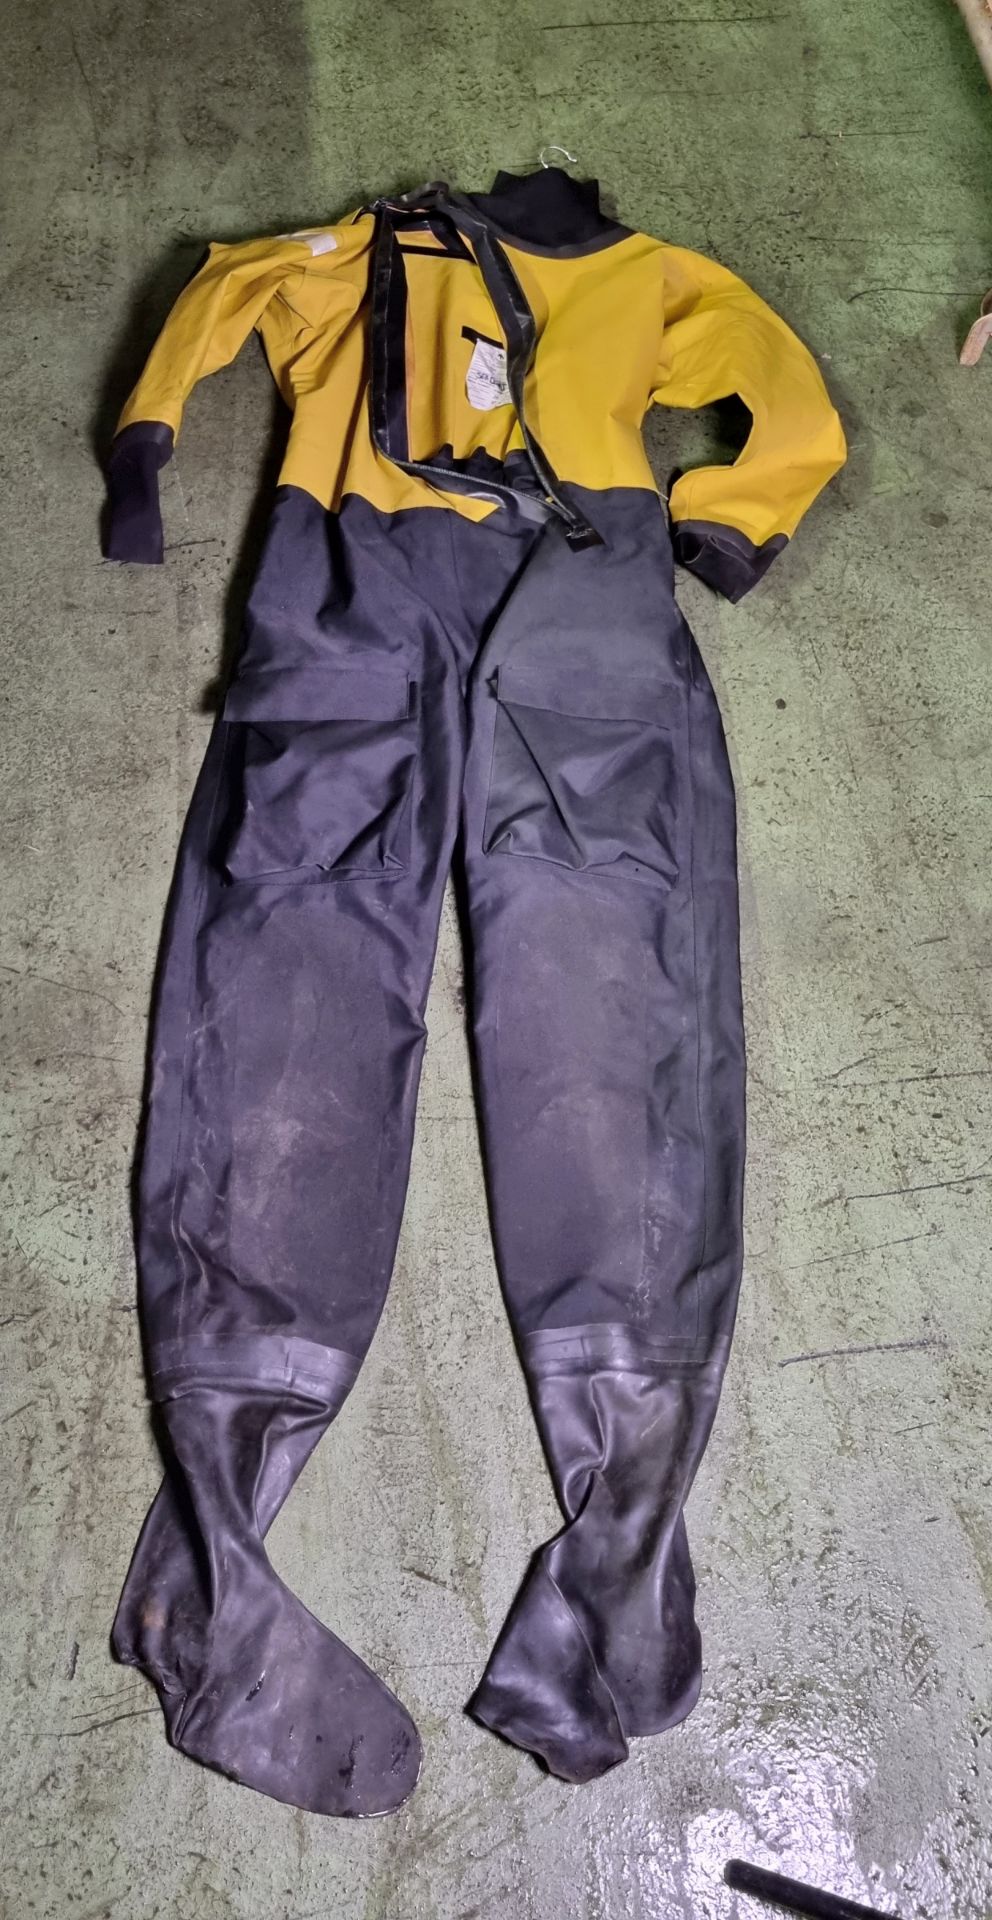 Yellow Dry Suits- 5xS, 11xM, 5xL - 21 total - Image 2 of 4